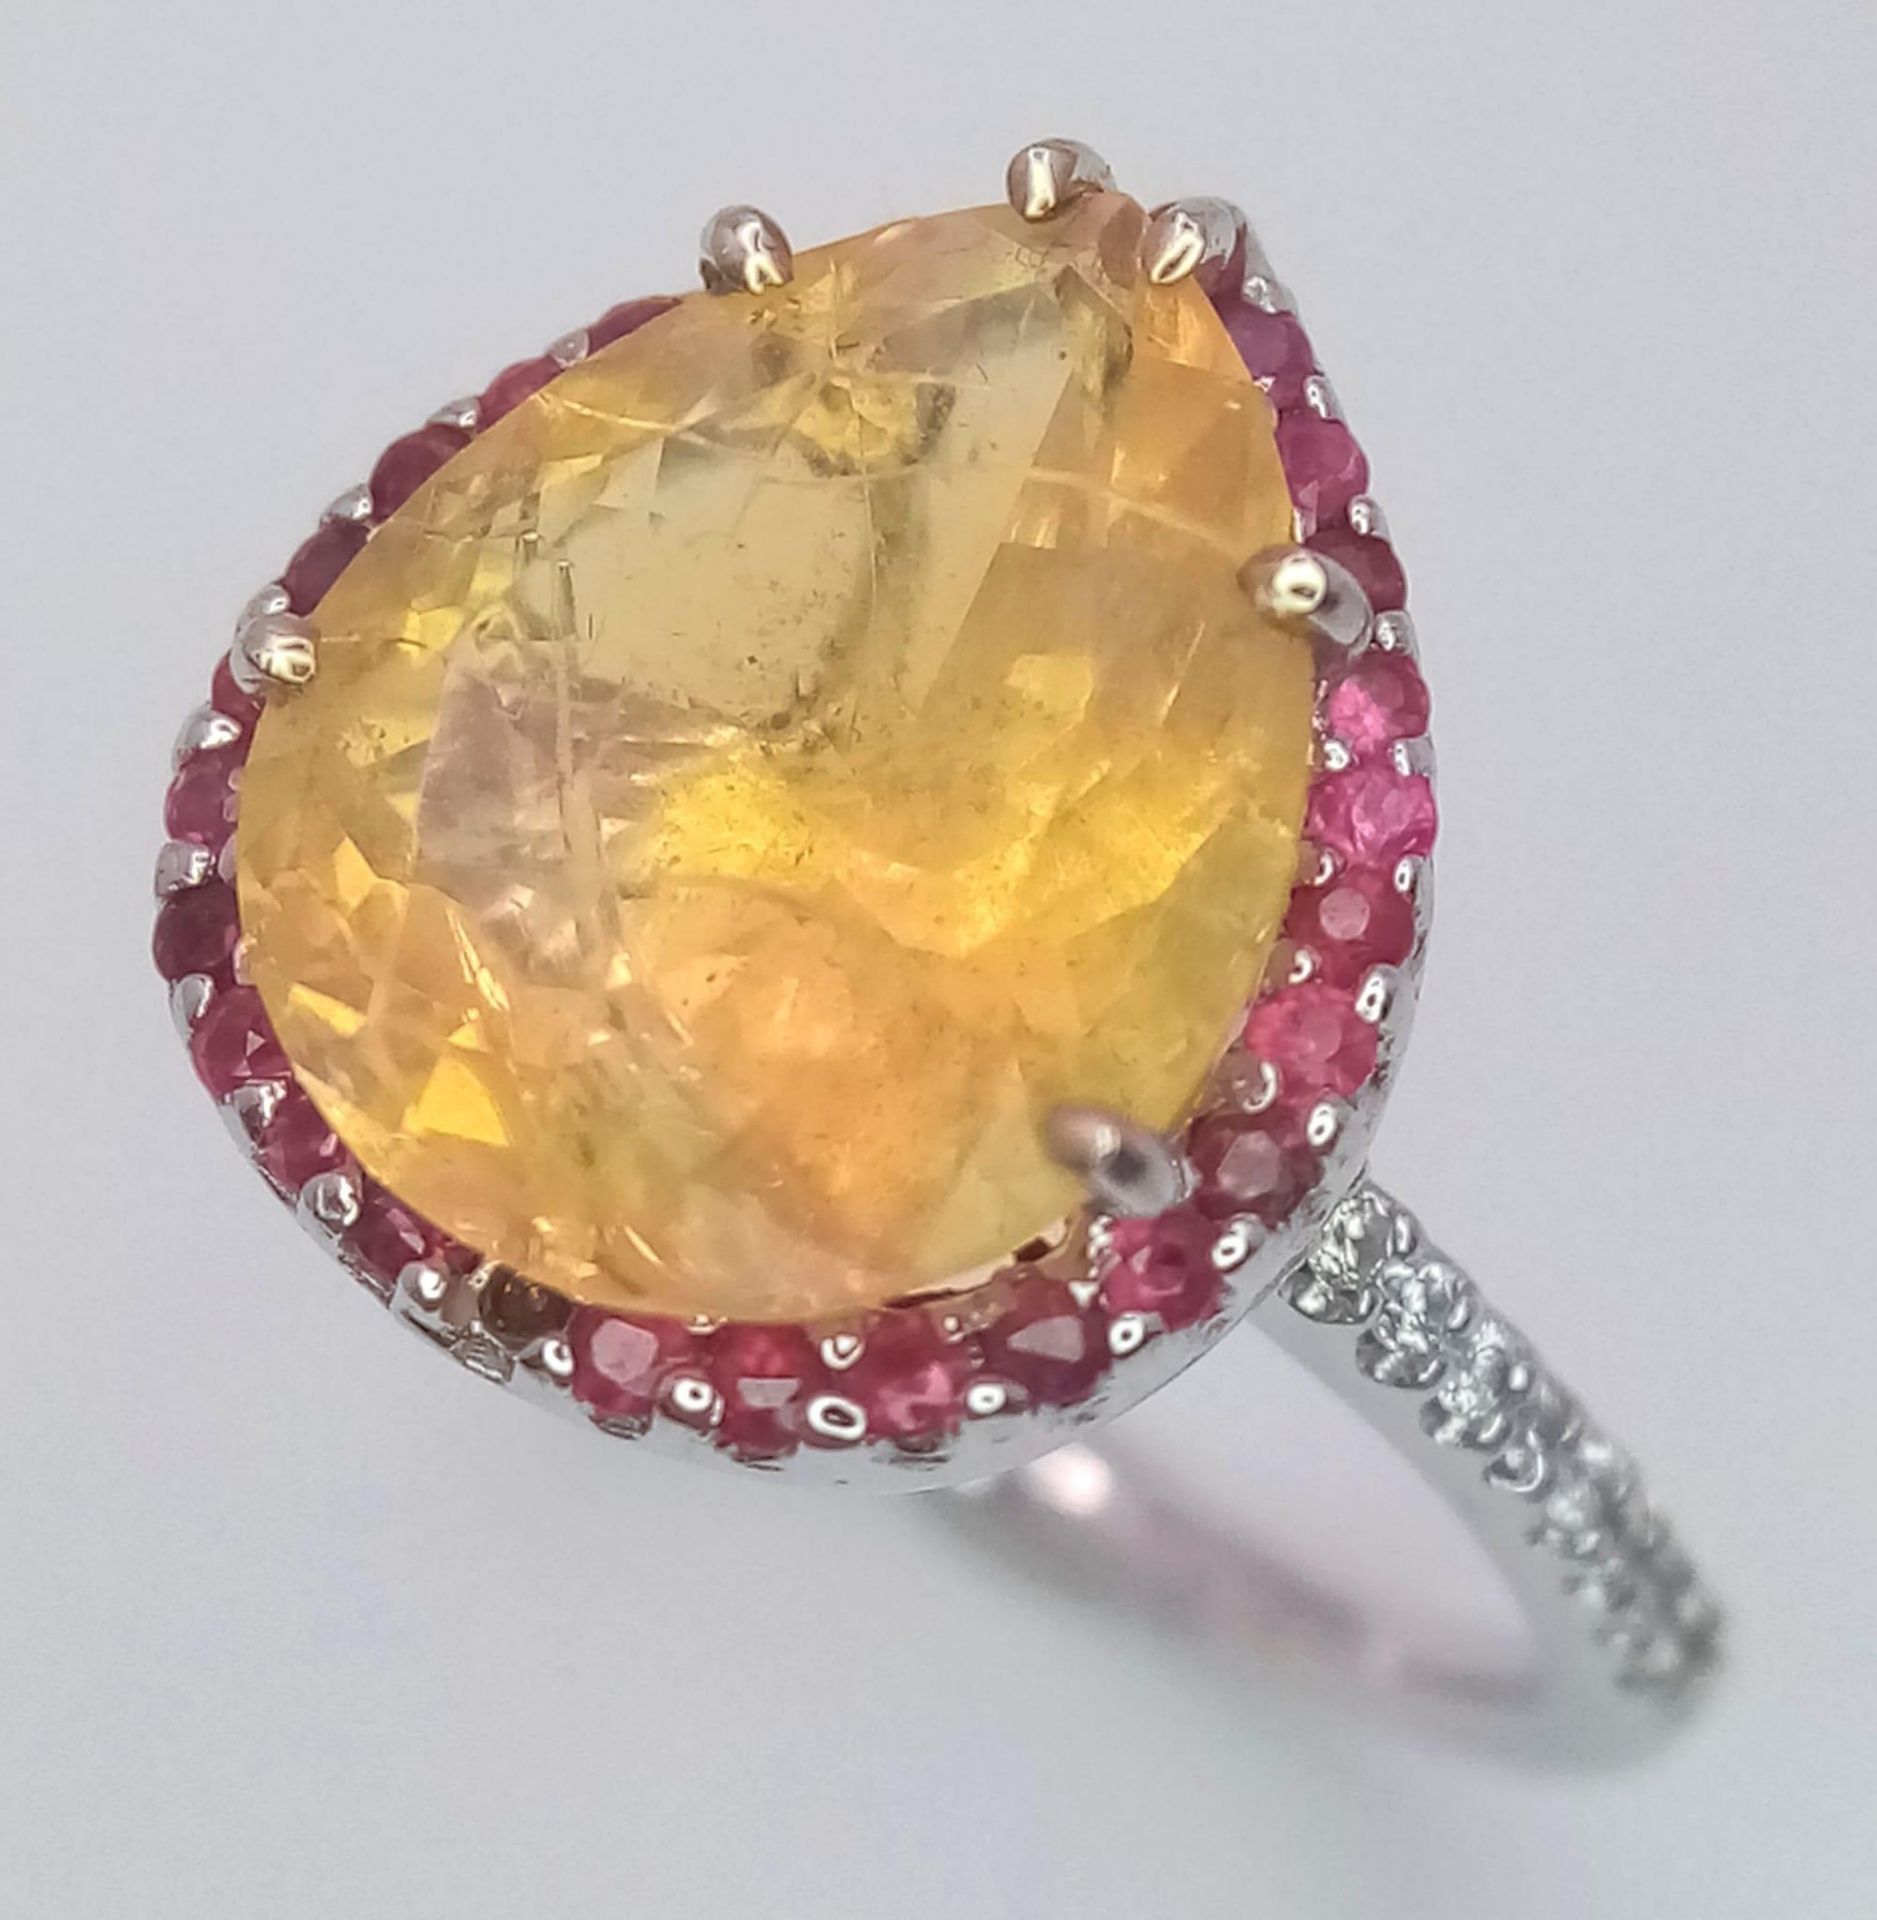 An 18 K white gold ring with a large, pear cut, fire opal exhibiting orange and green hues, - Image 4 of 9